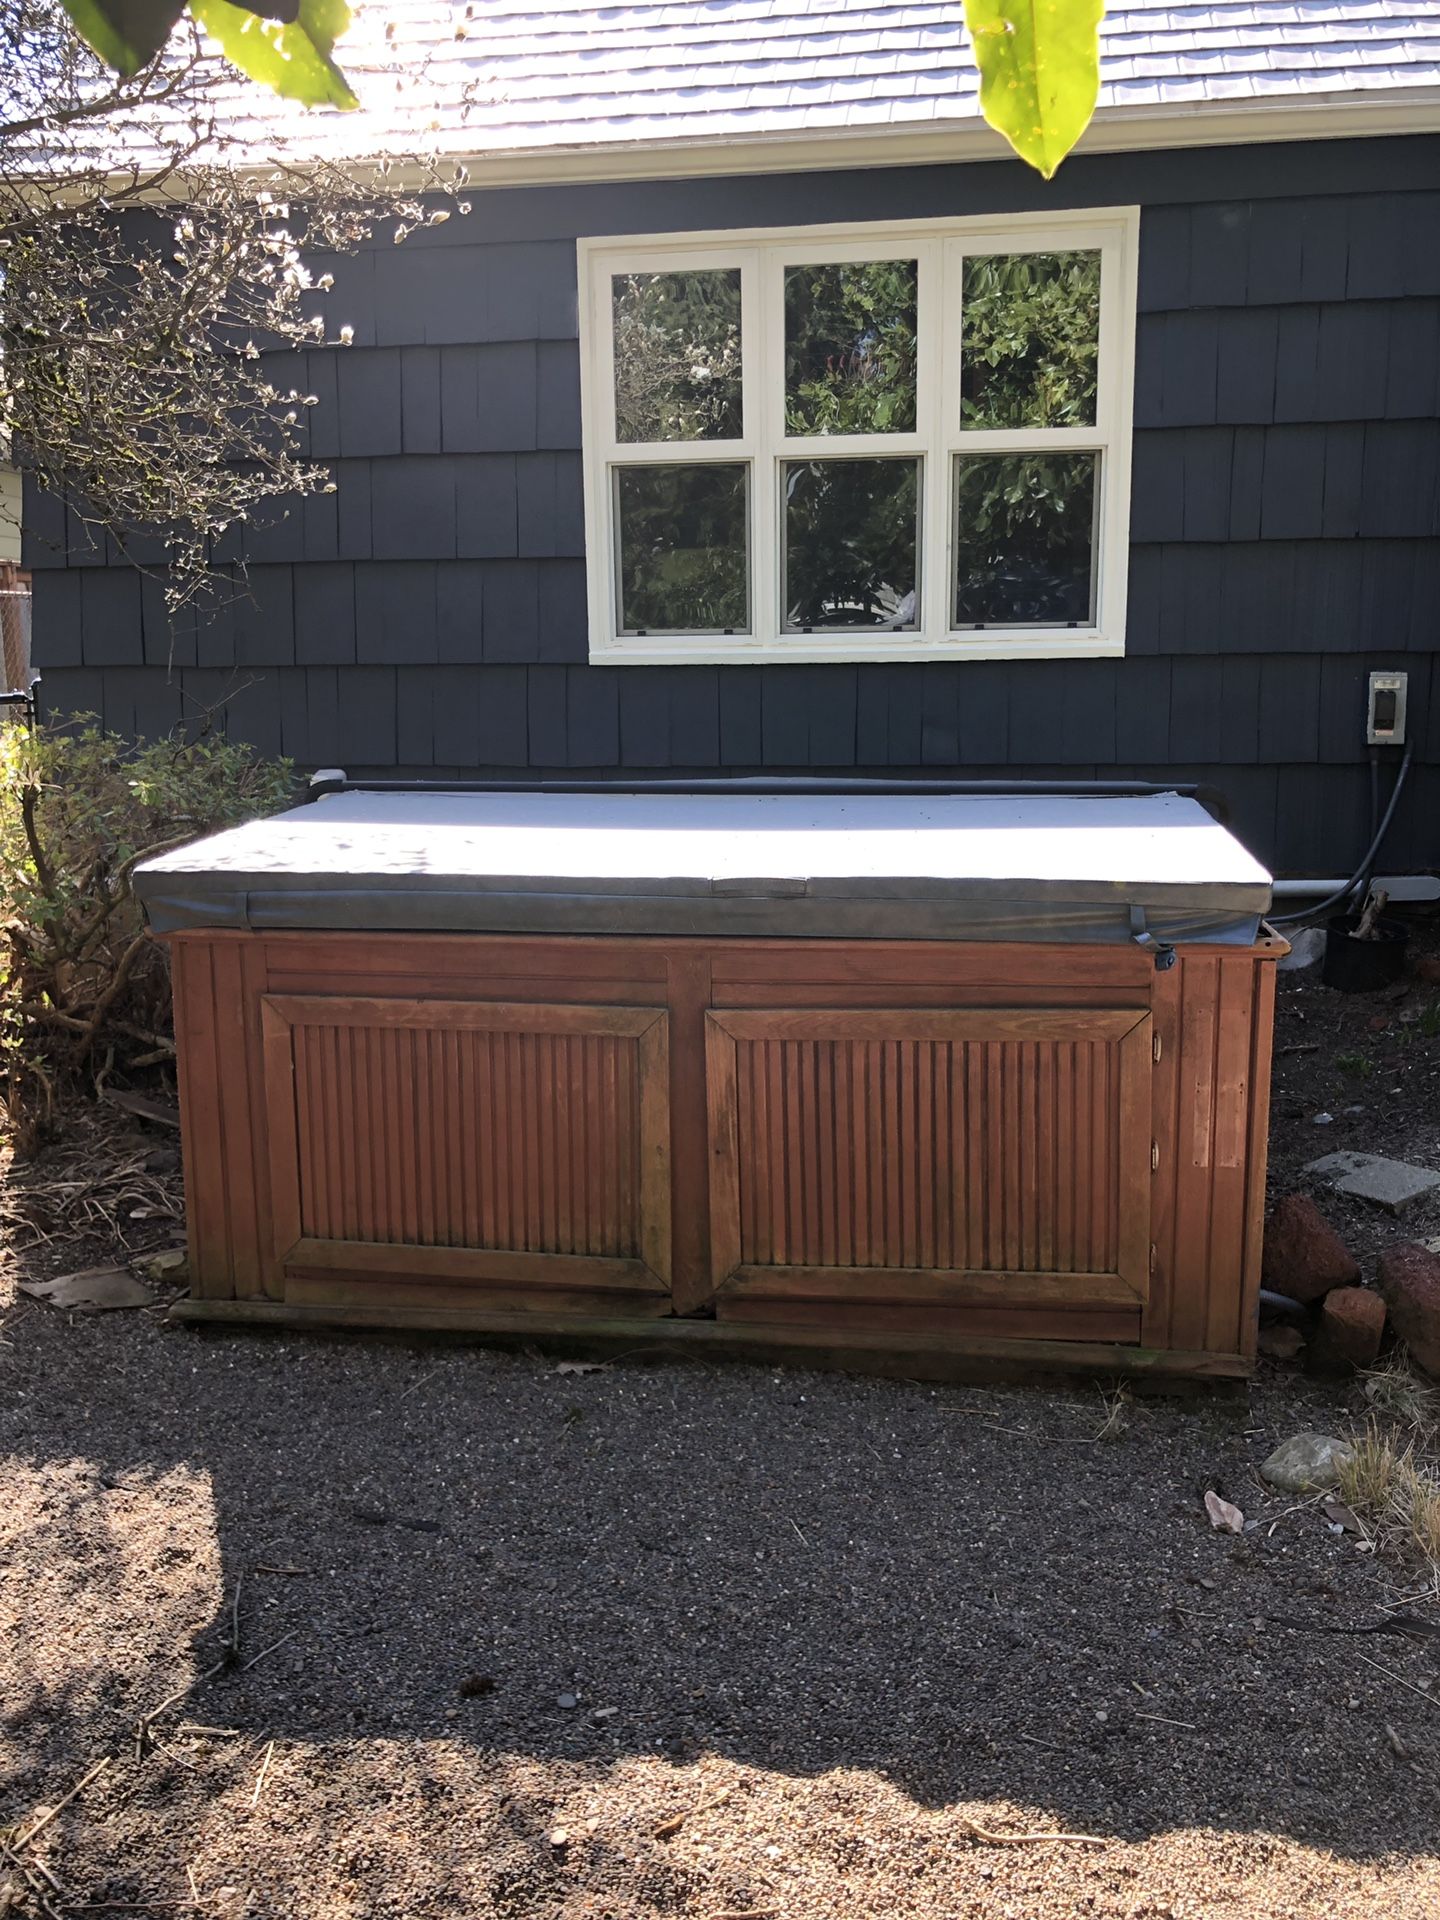 Free hot tub! I will pay you $50.00!